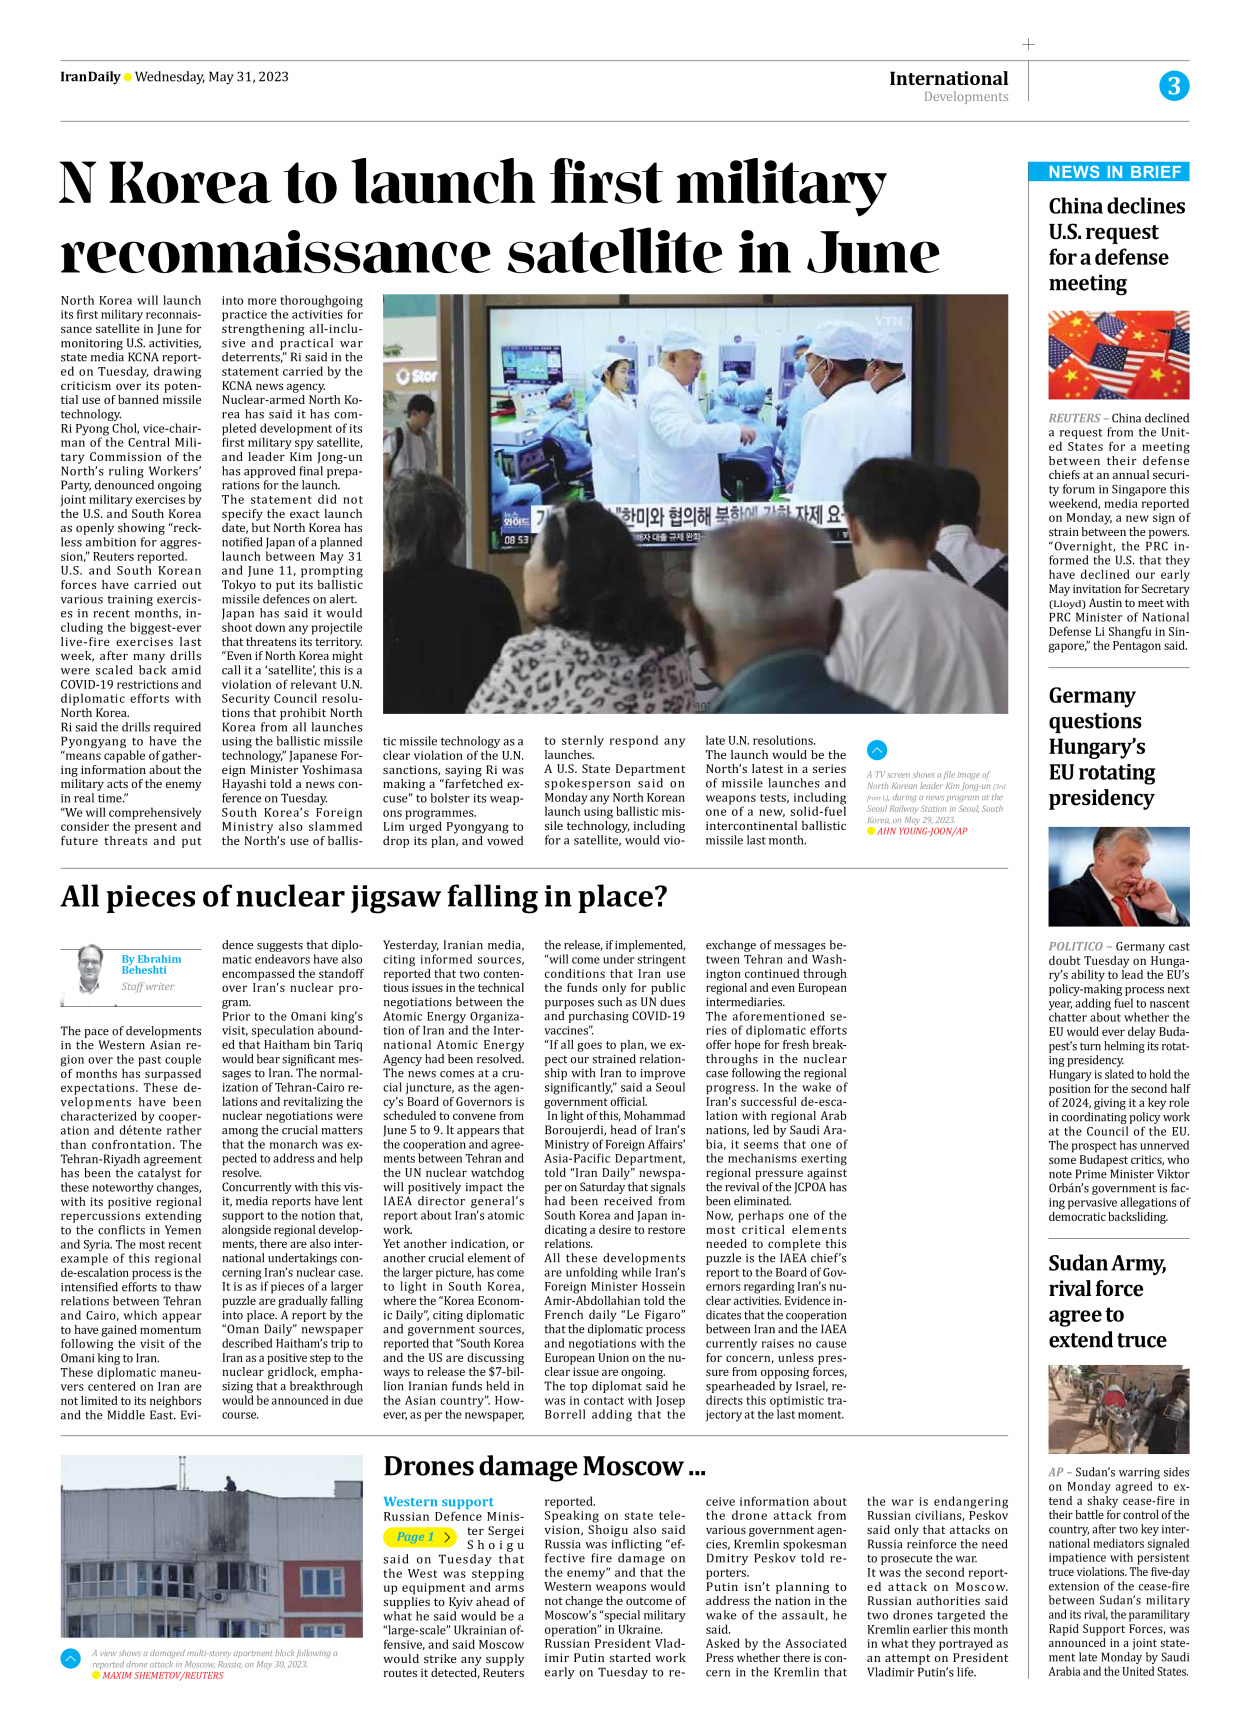 Iran Daily - Number Seven Thousand Three Hundred and Five - 31 May 2023 - Page 3